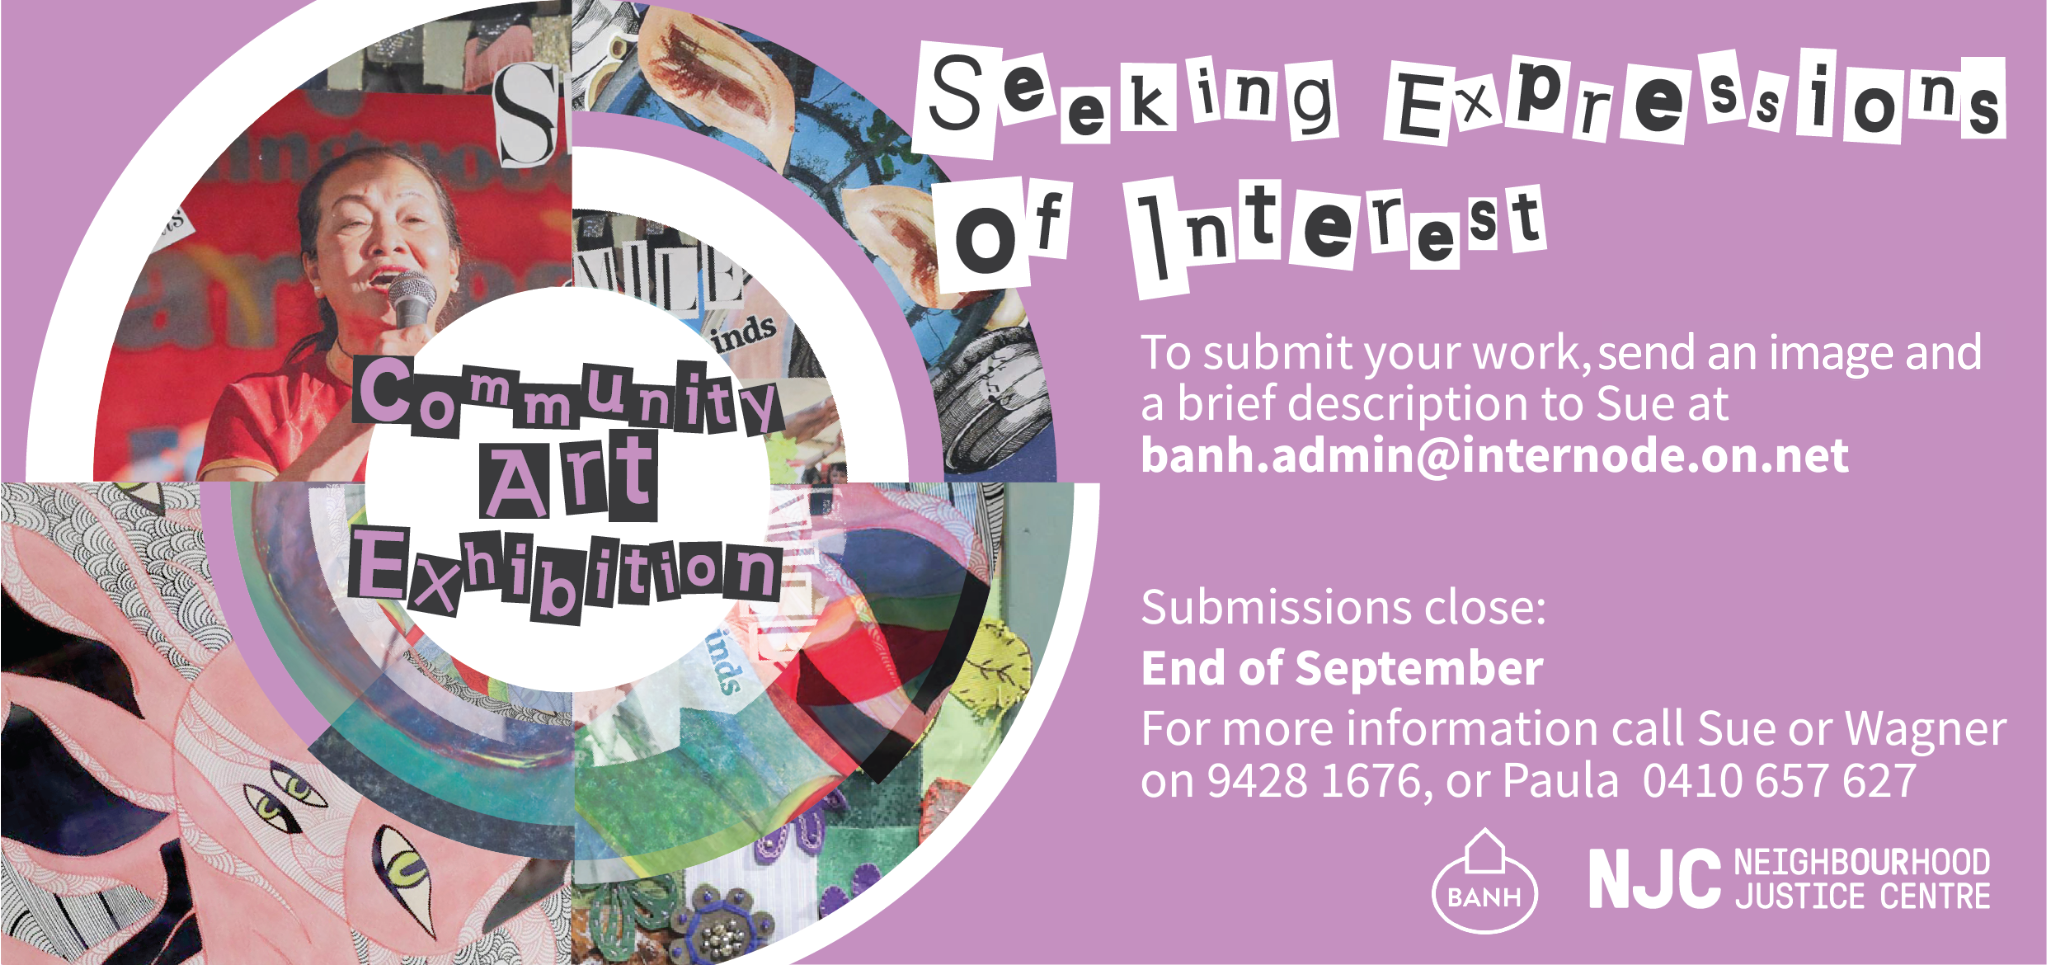 A collection of community art works presented together in a circle. Text on the side states: Seeking Expressions of Interest. To submit your work, send an image and brief description to Sue at banh.admin@internode.on.net